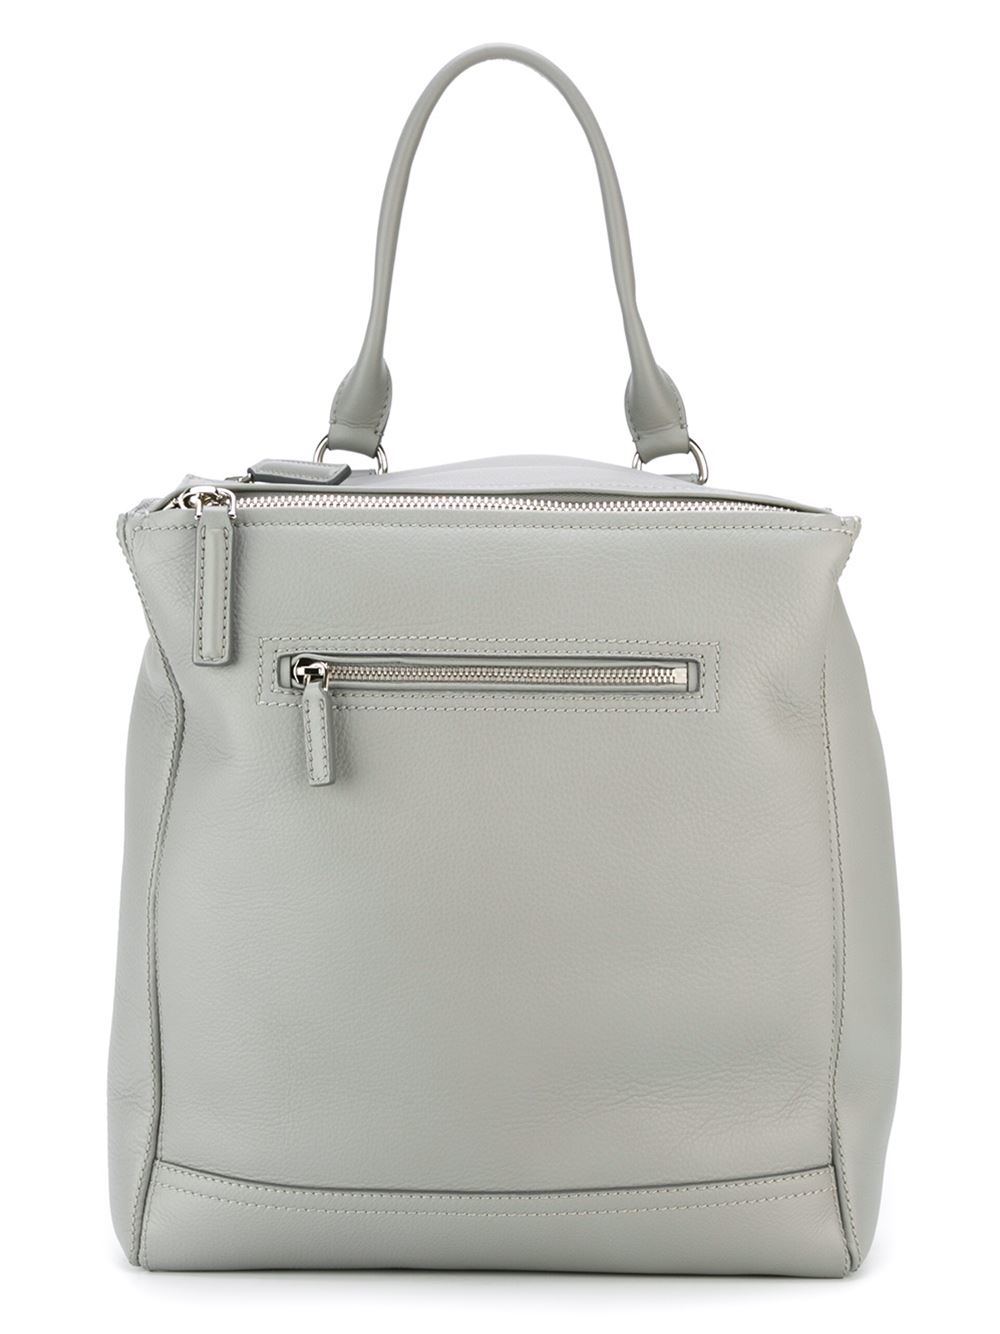 Givenchy Pandora Leather Backpack in Grey (Gray) - Lyst